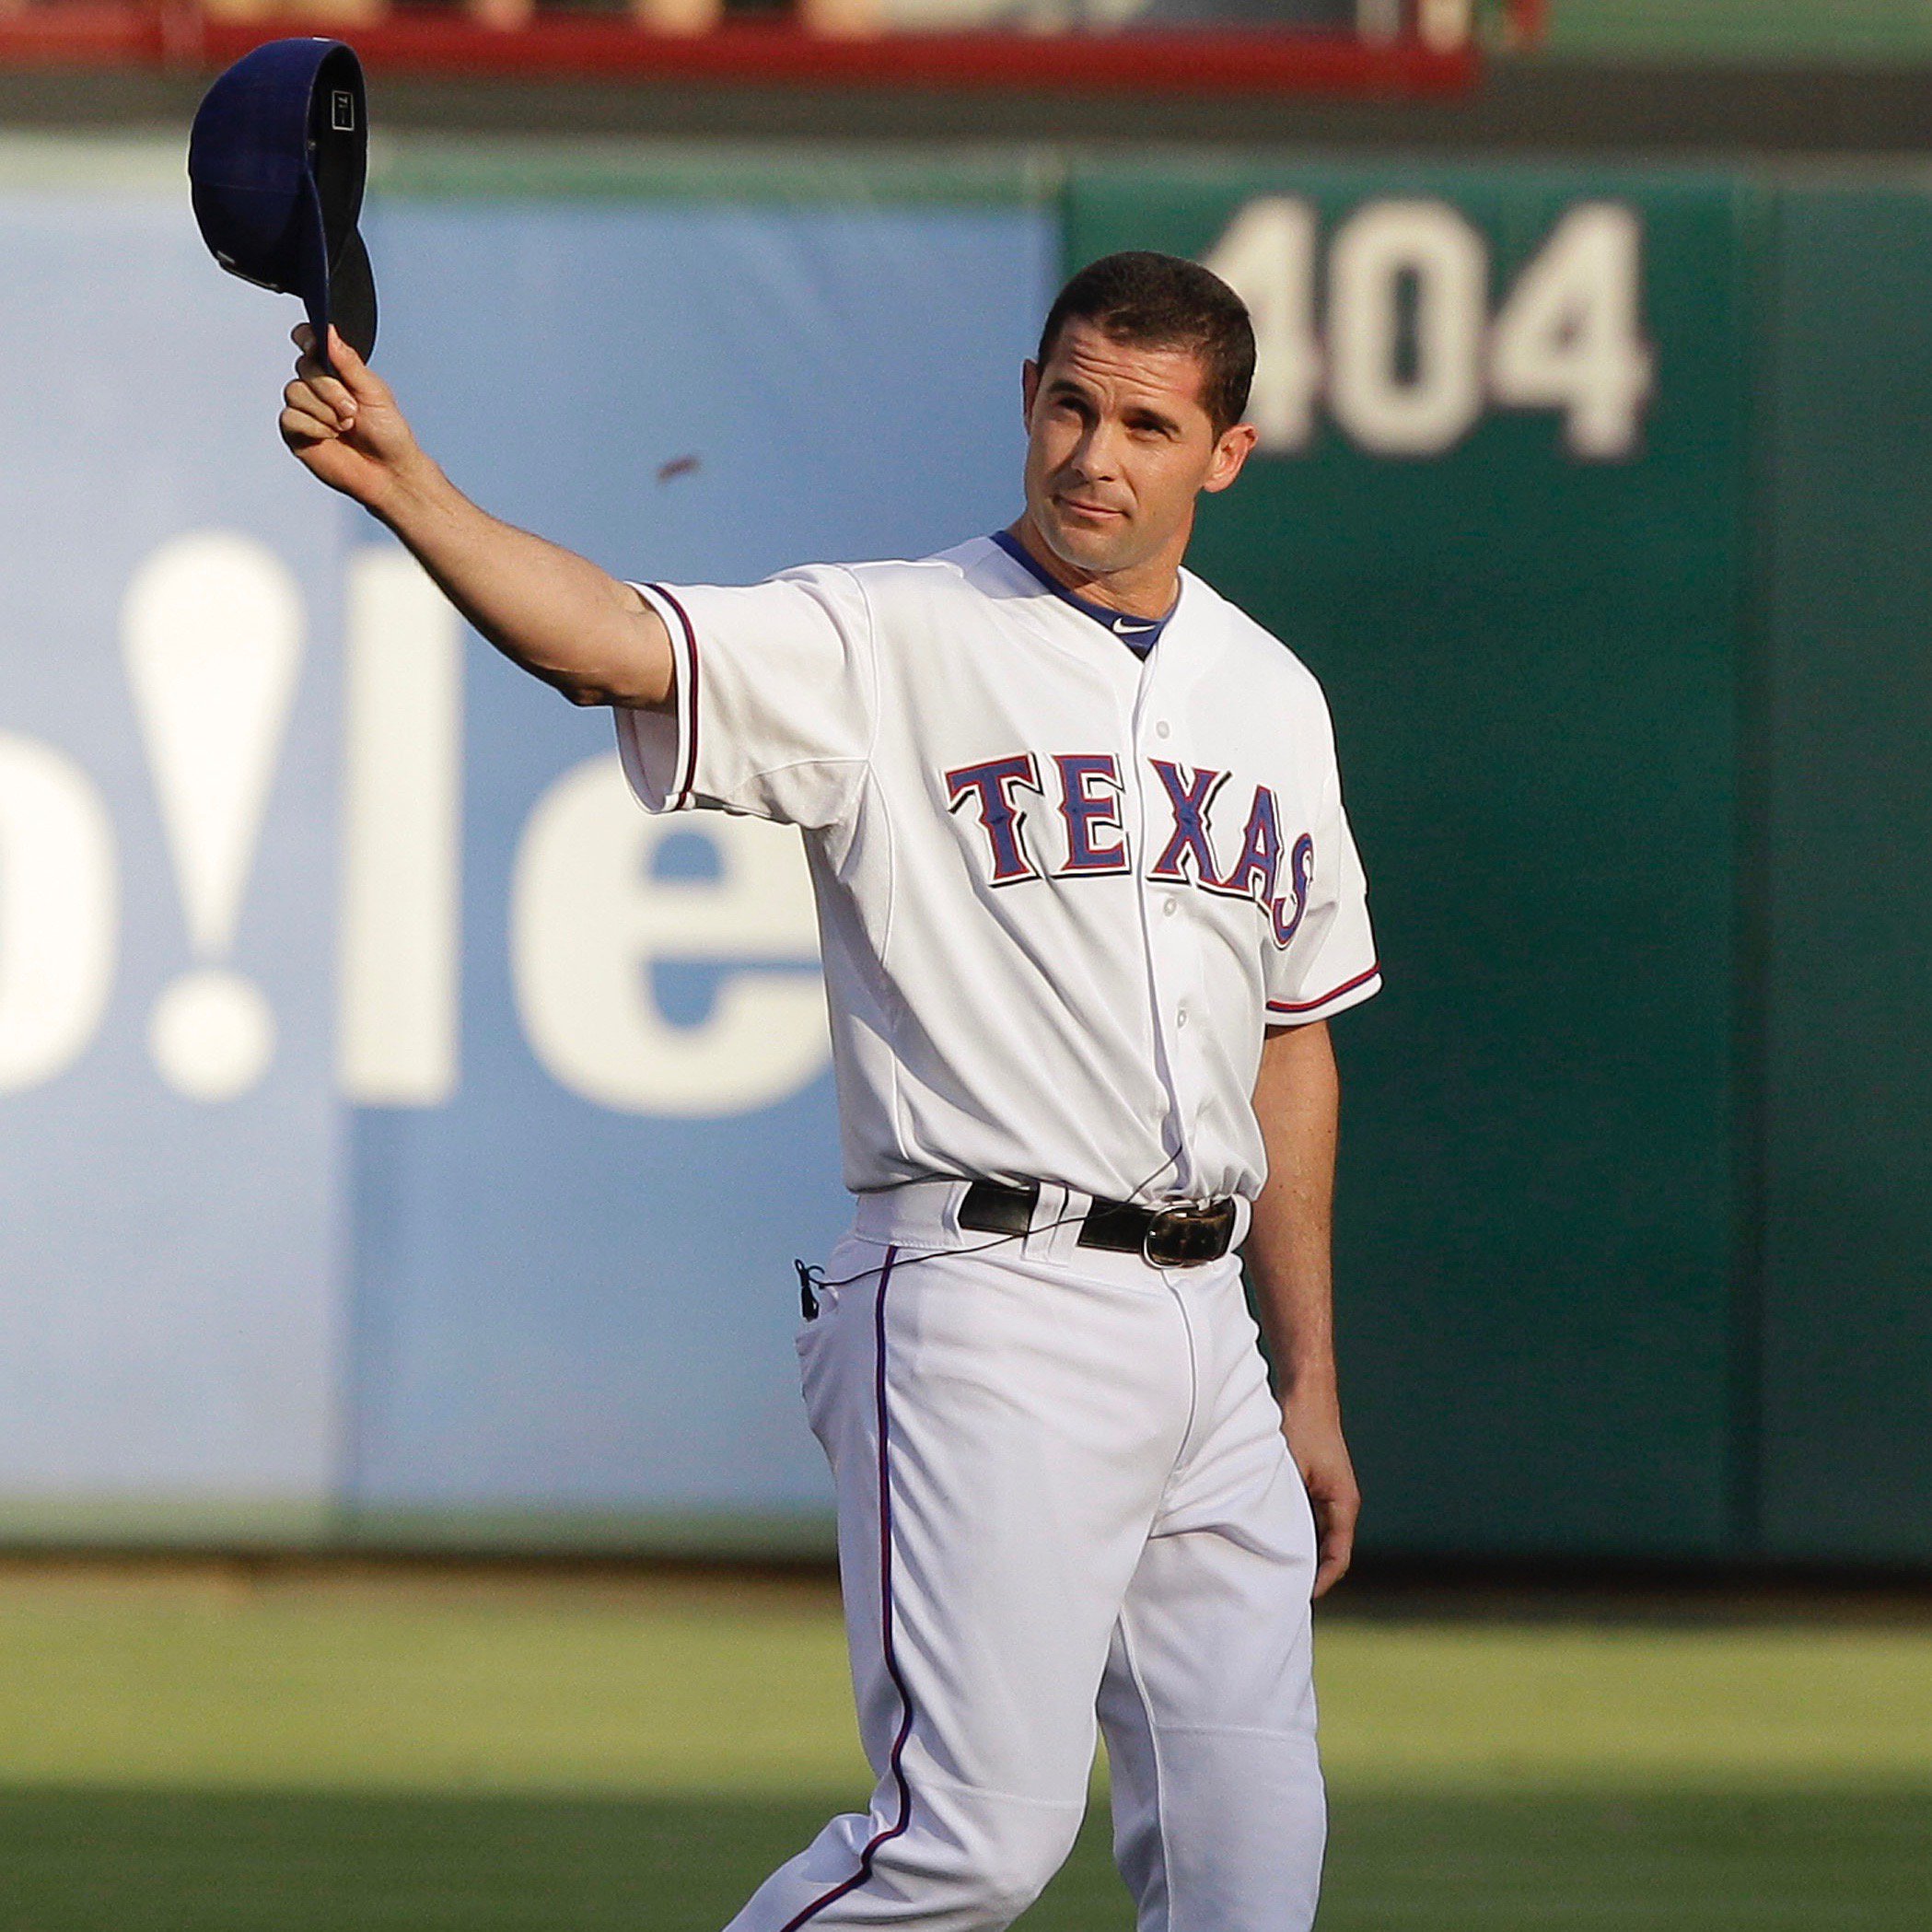 Texas Rangers' Michael Young, right, reaches up to congratulate